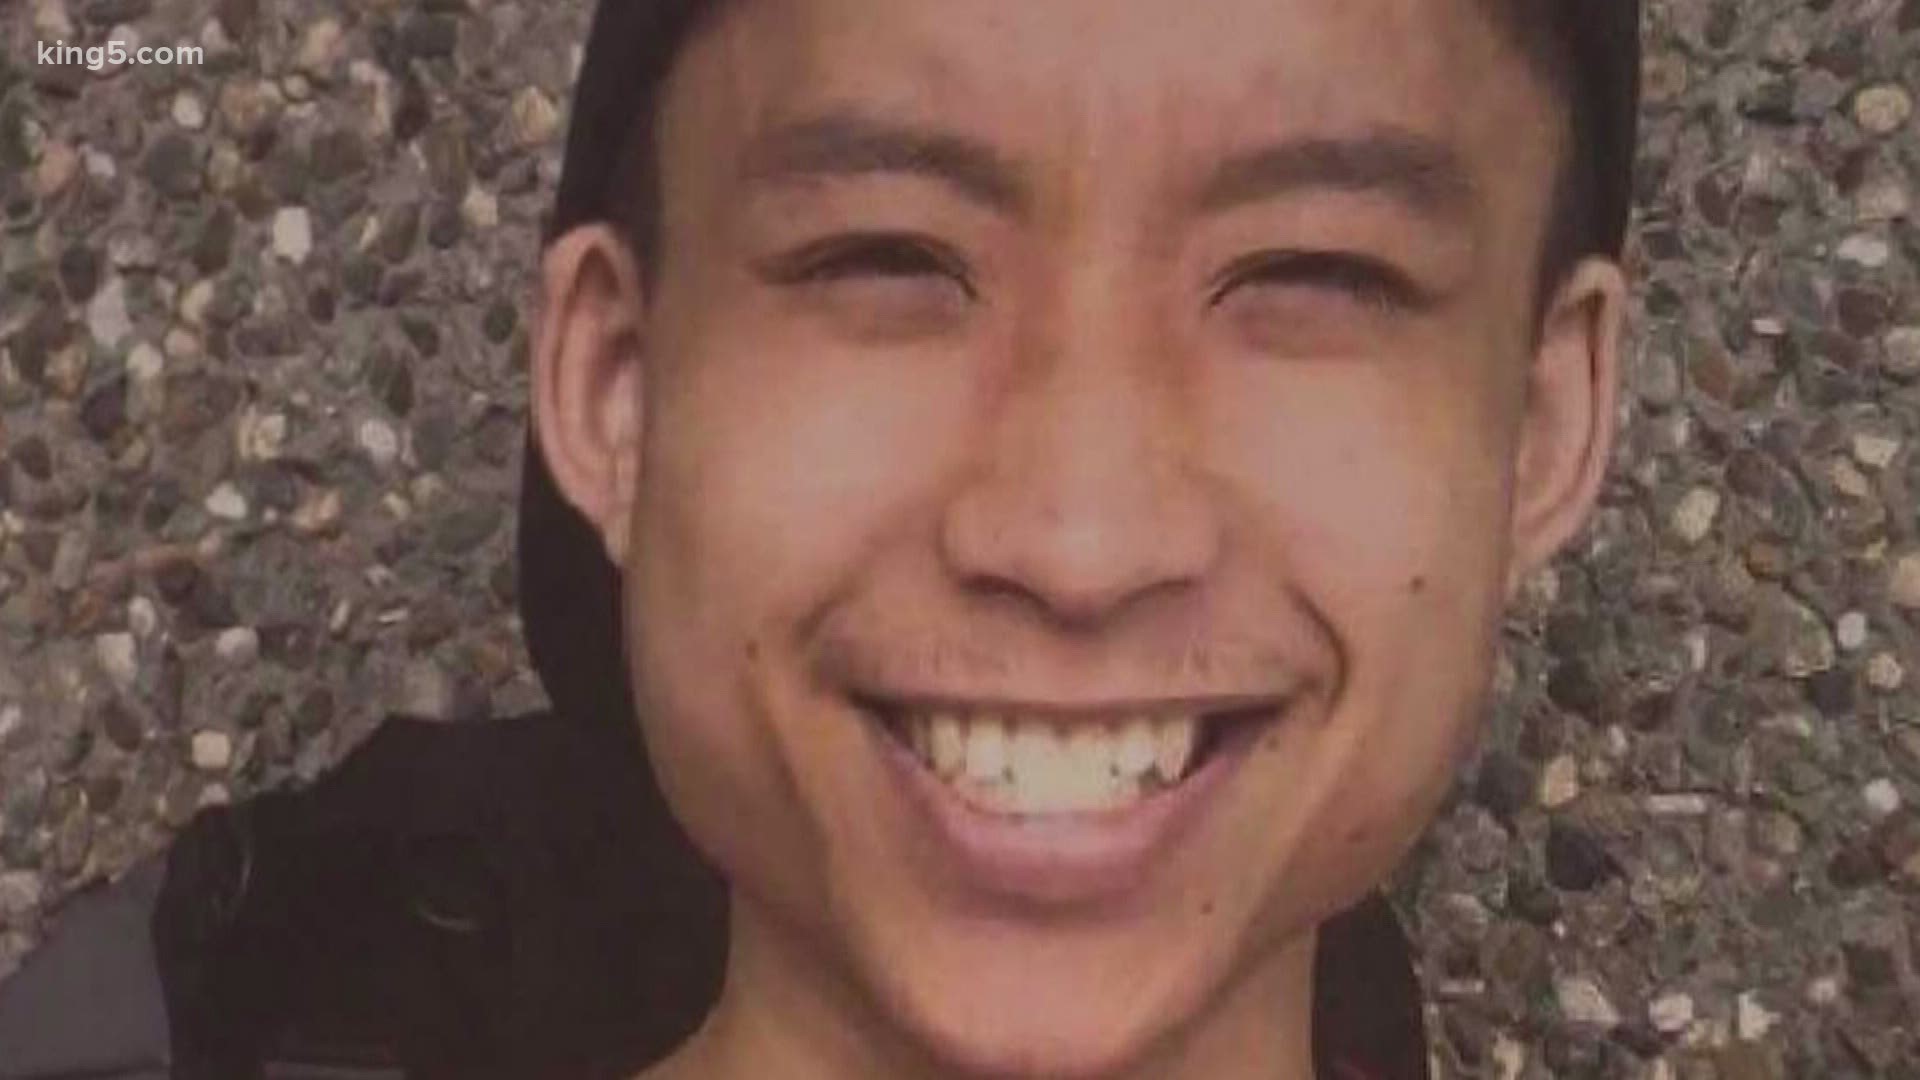 Tommy Le was killed by King County Sheriff's Office deputies in 2017. Deputies first said Le was carrying "a sharp object." The object was revealed to be a pen.